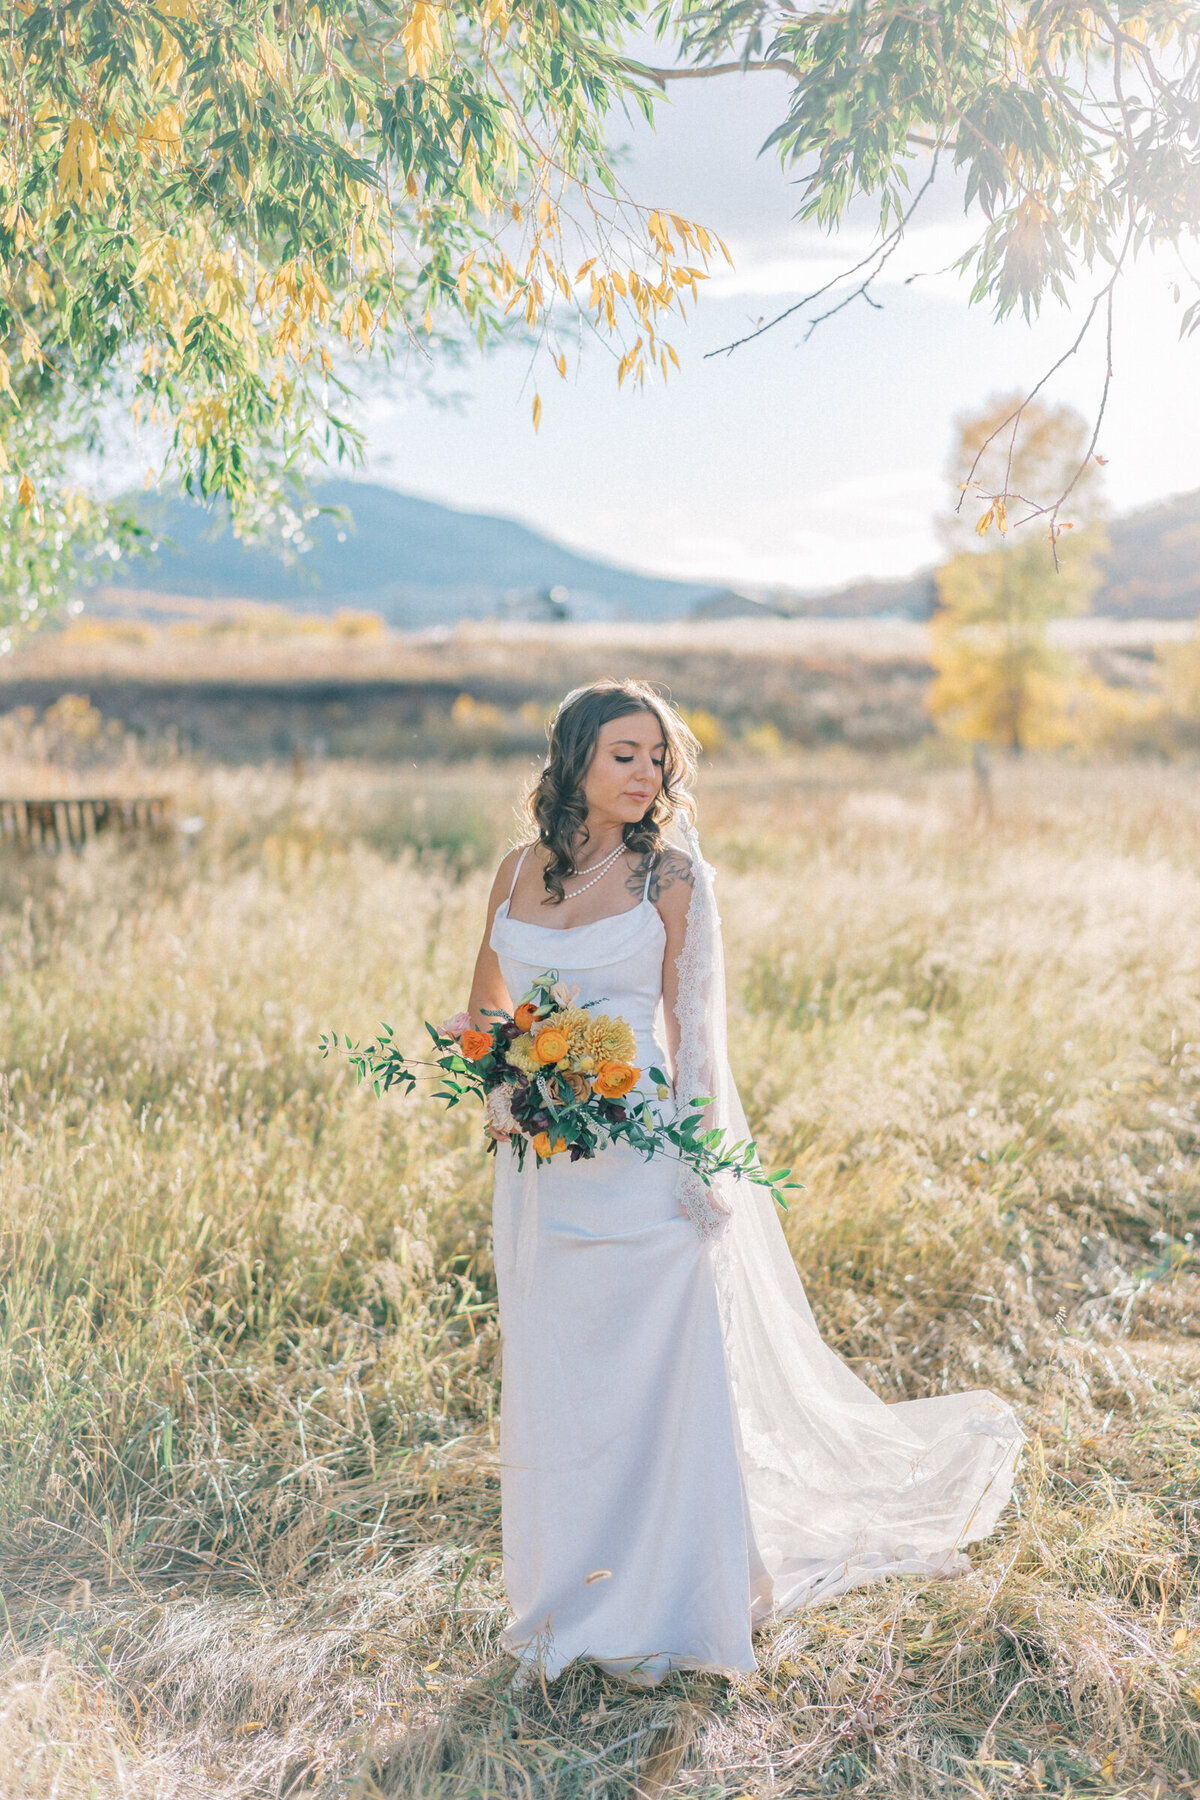 Steamboat_Springs_Ranch_wedding_Mary_Ann_craddock_photography_0011